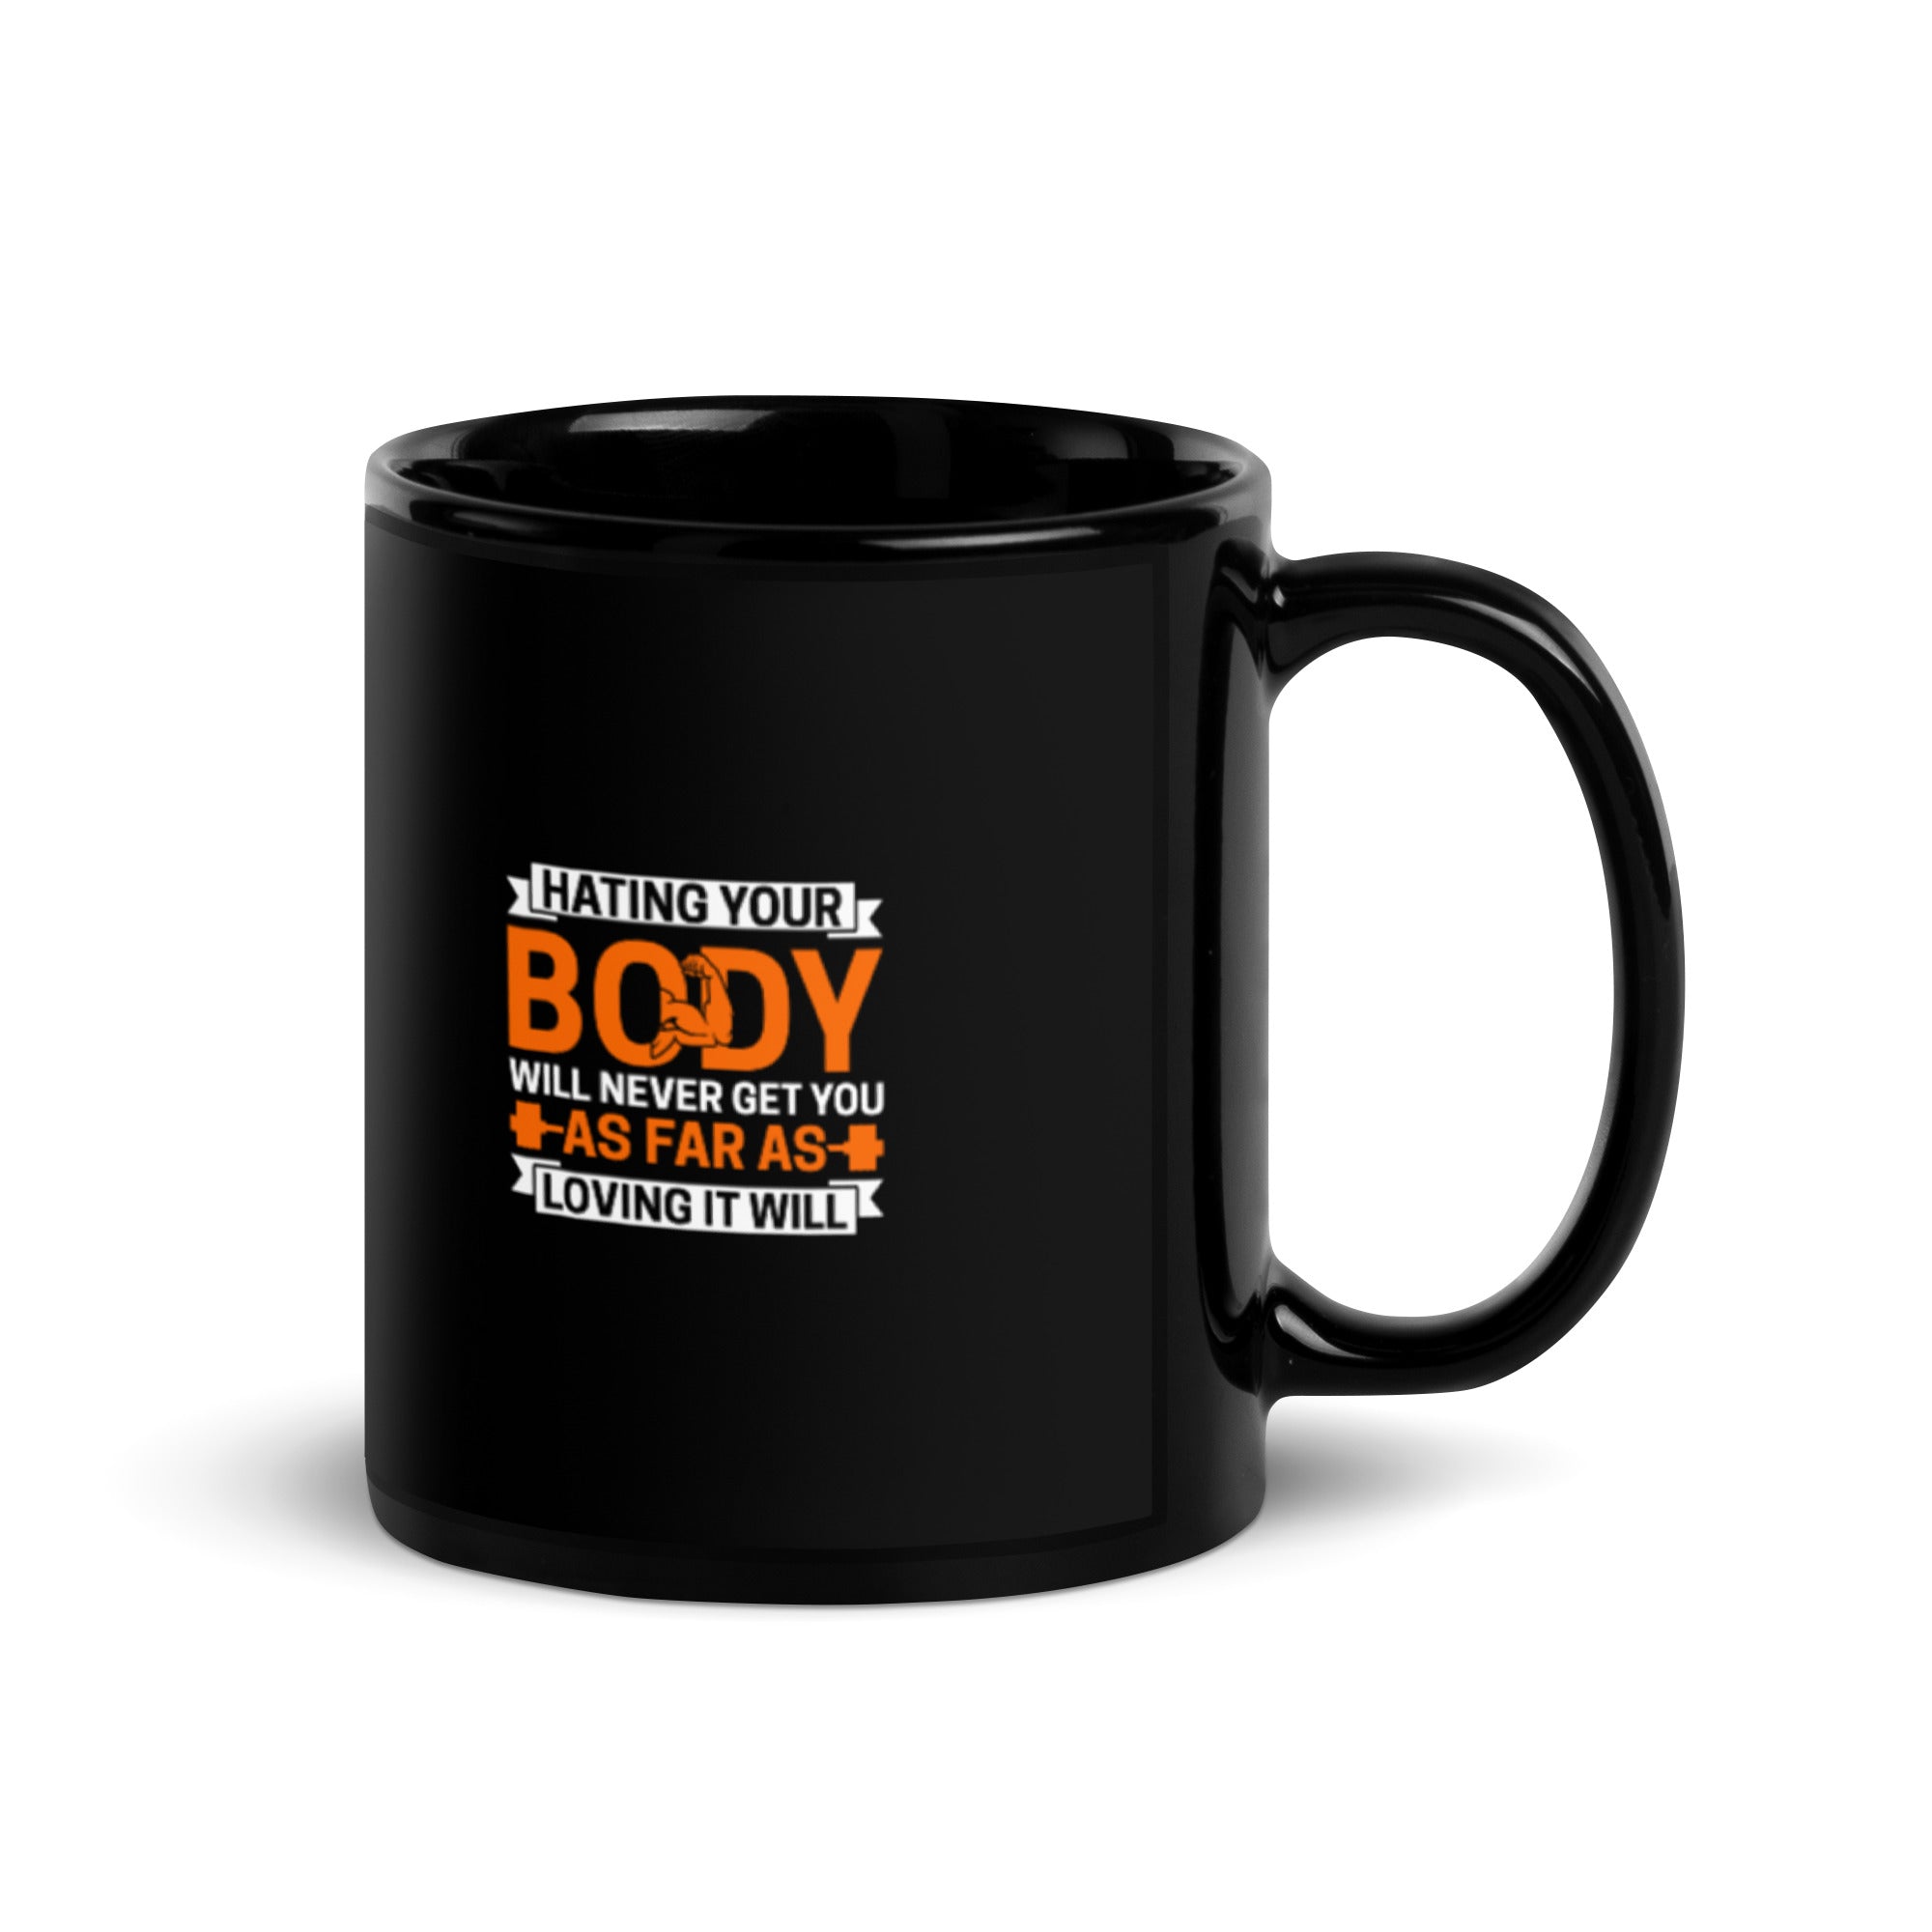 Hating Your Body Will Never Get You Far - Black Glossy Mug